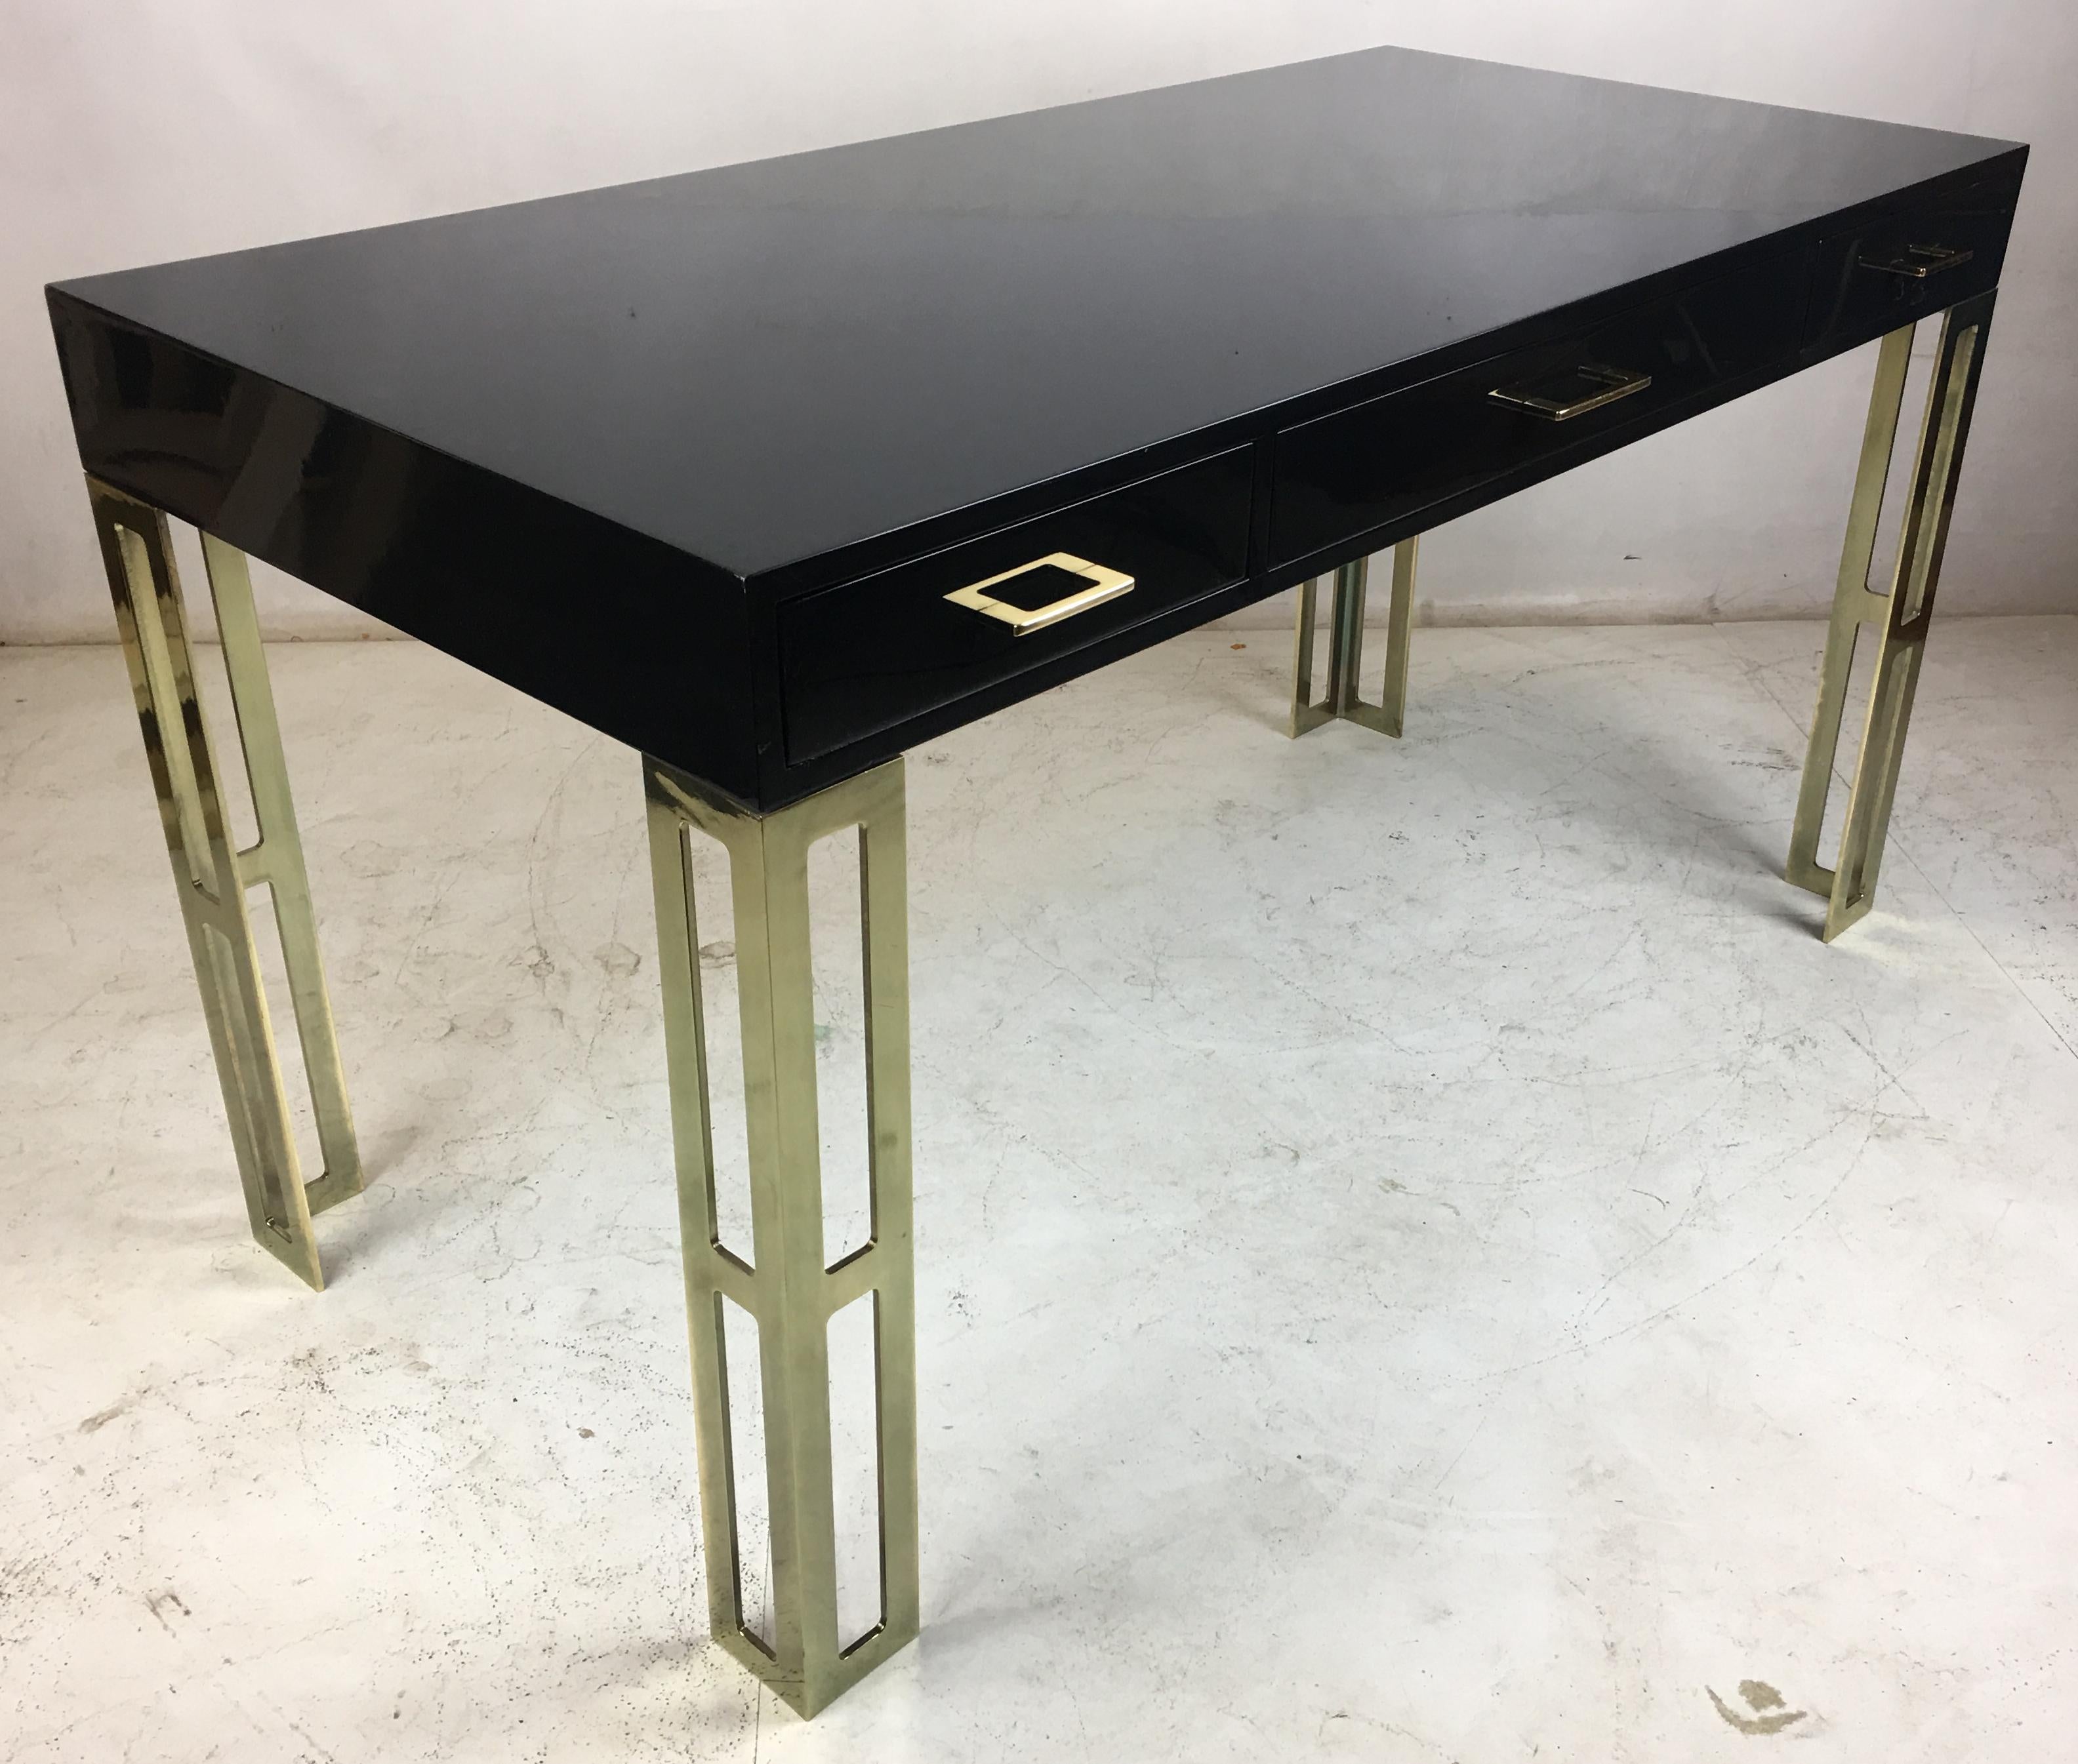 Elegant black lacquer writing desk with polished brass legs and drawer pulls. The desk, with its three drawers, has been freshly lacquered and hand polished to a high gloss and the brass hardware has been professionally polished and lacquered to